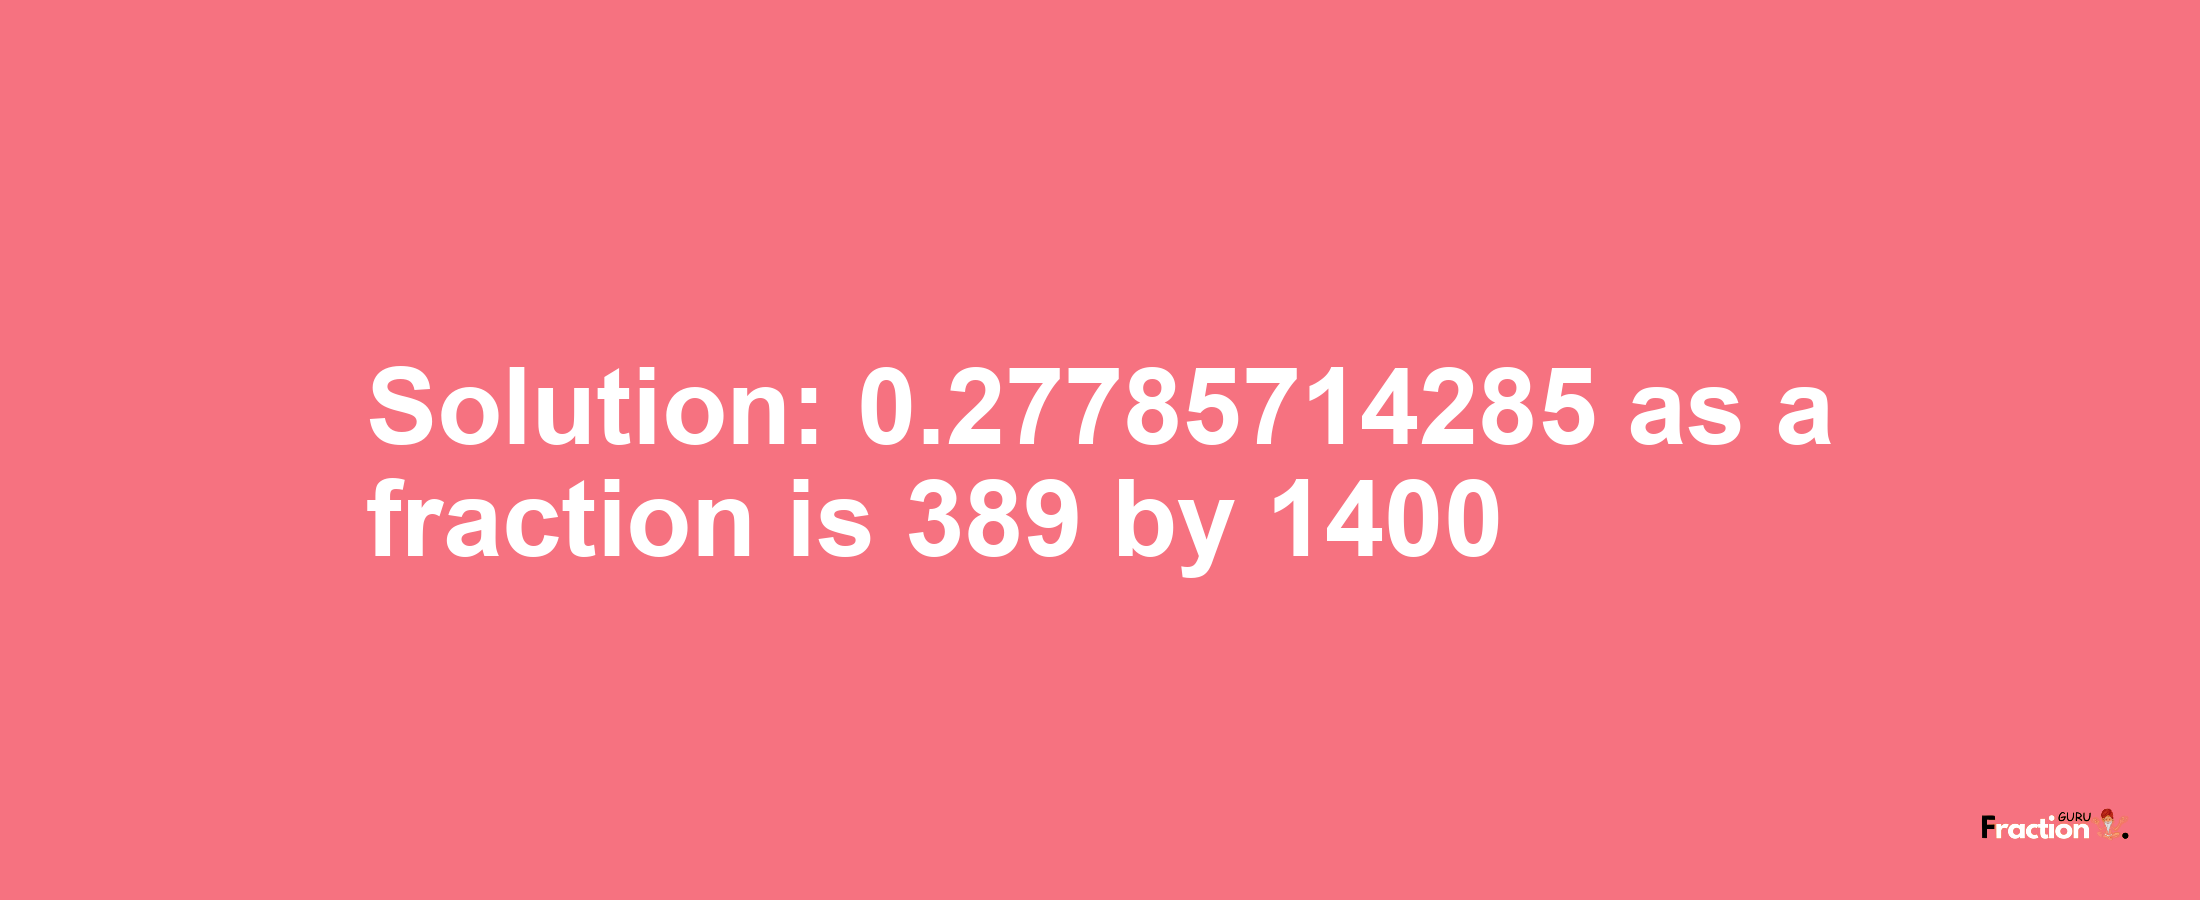 Solution:0.27785714285 as a fraction is 389/1400